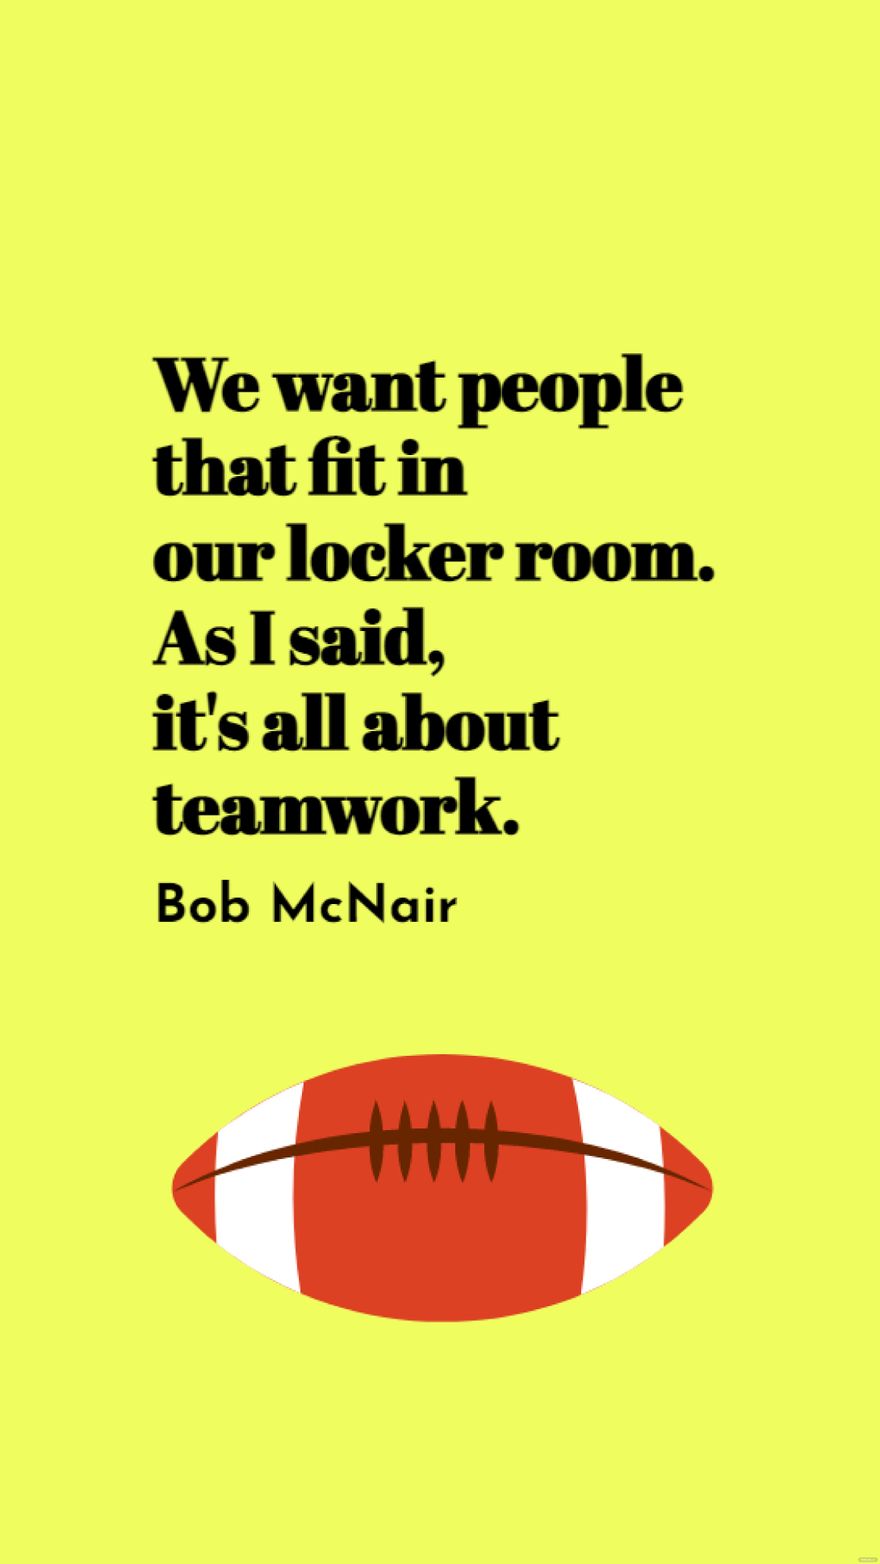 Free Bob McNair - We want people that fit in our locker room. As I said, it's all about teamwork. in JPG